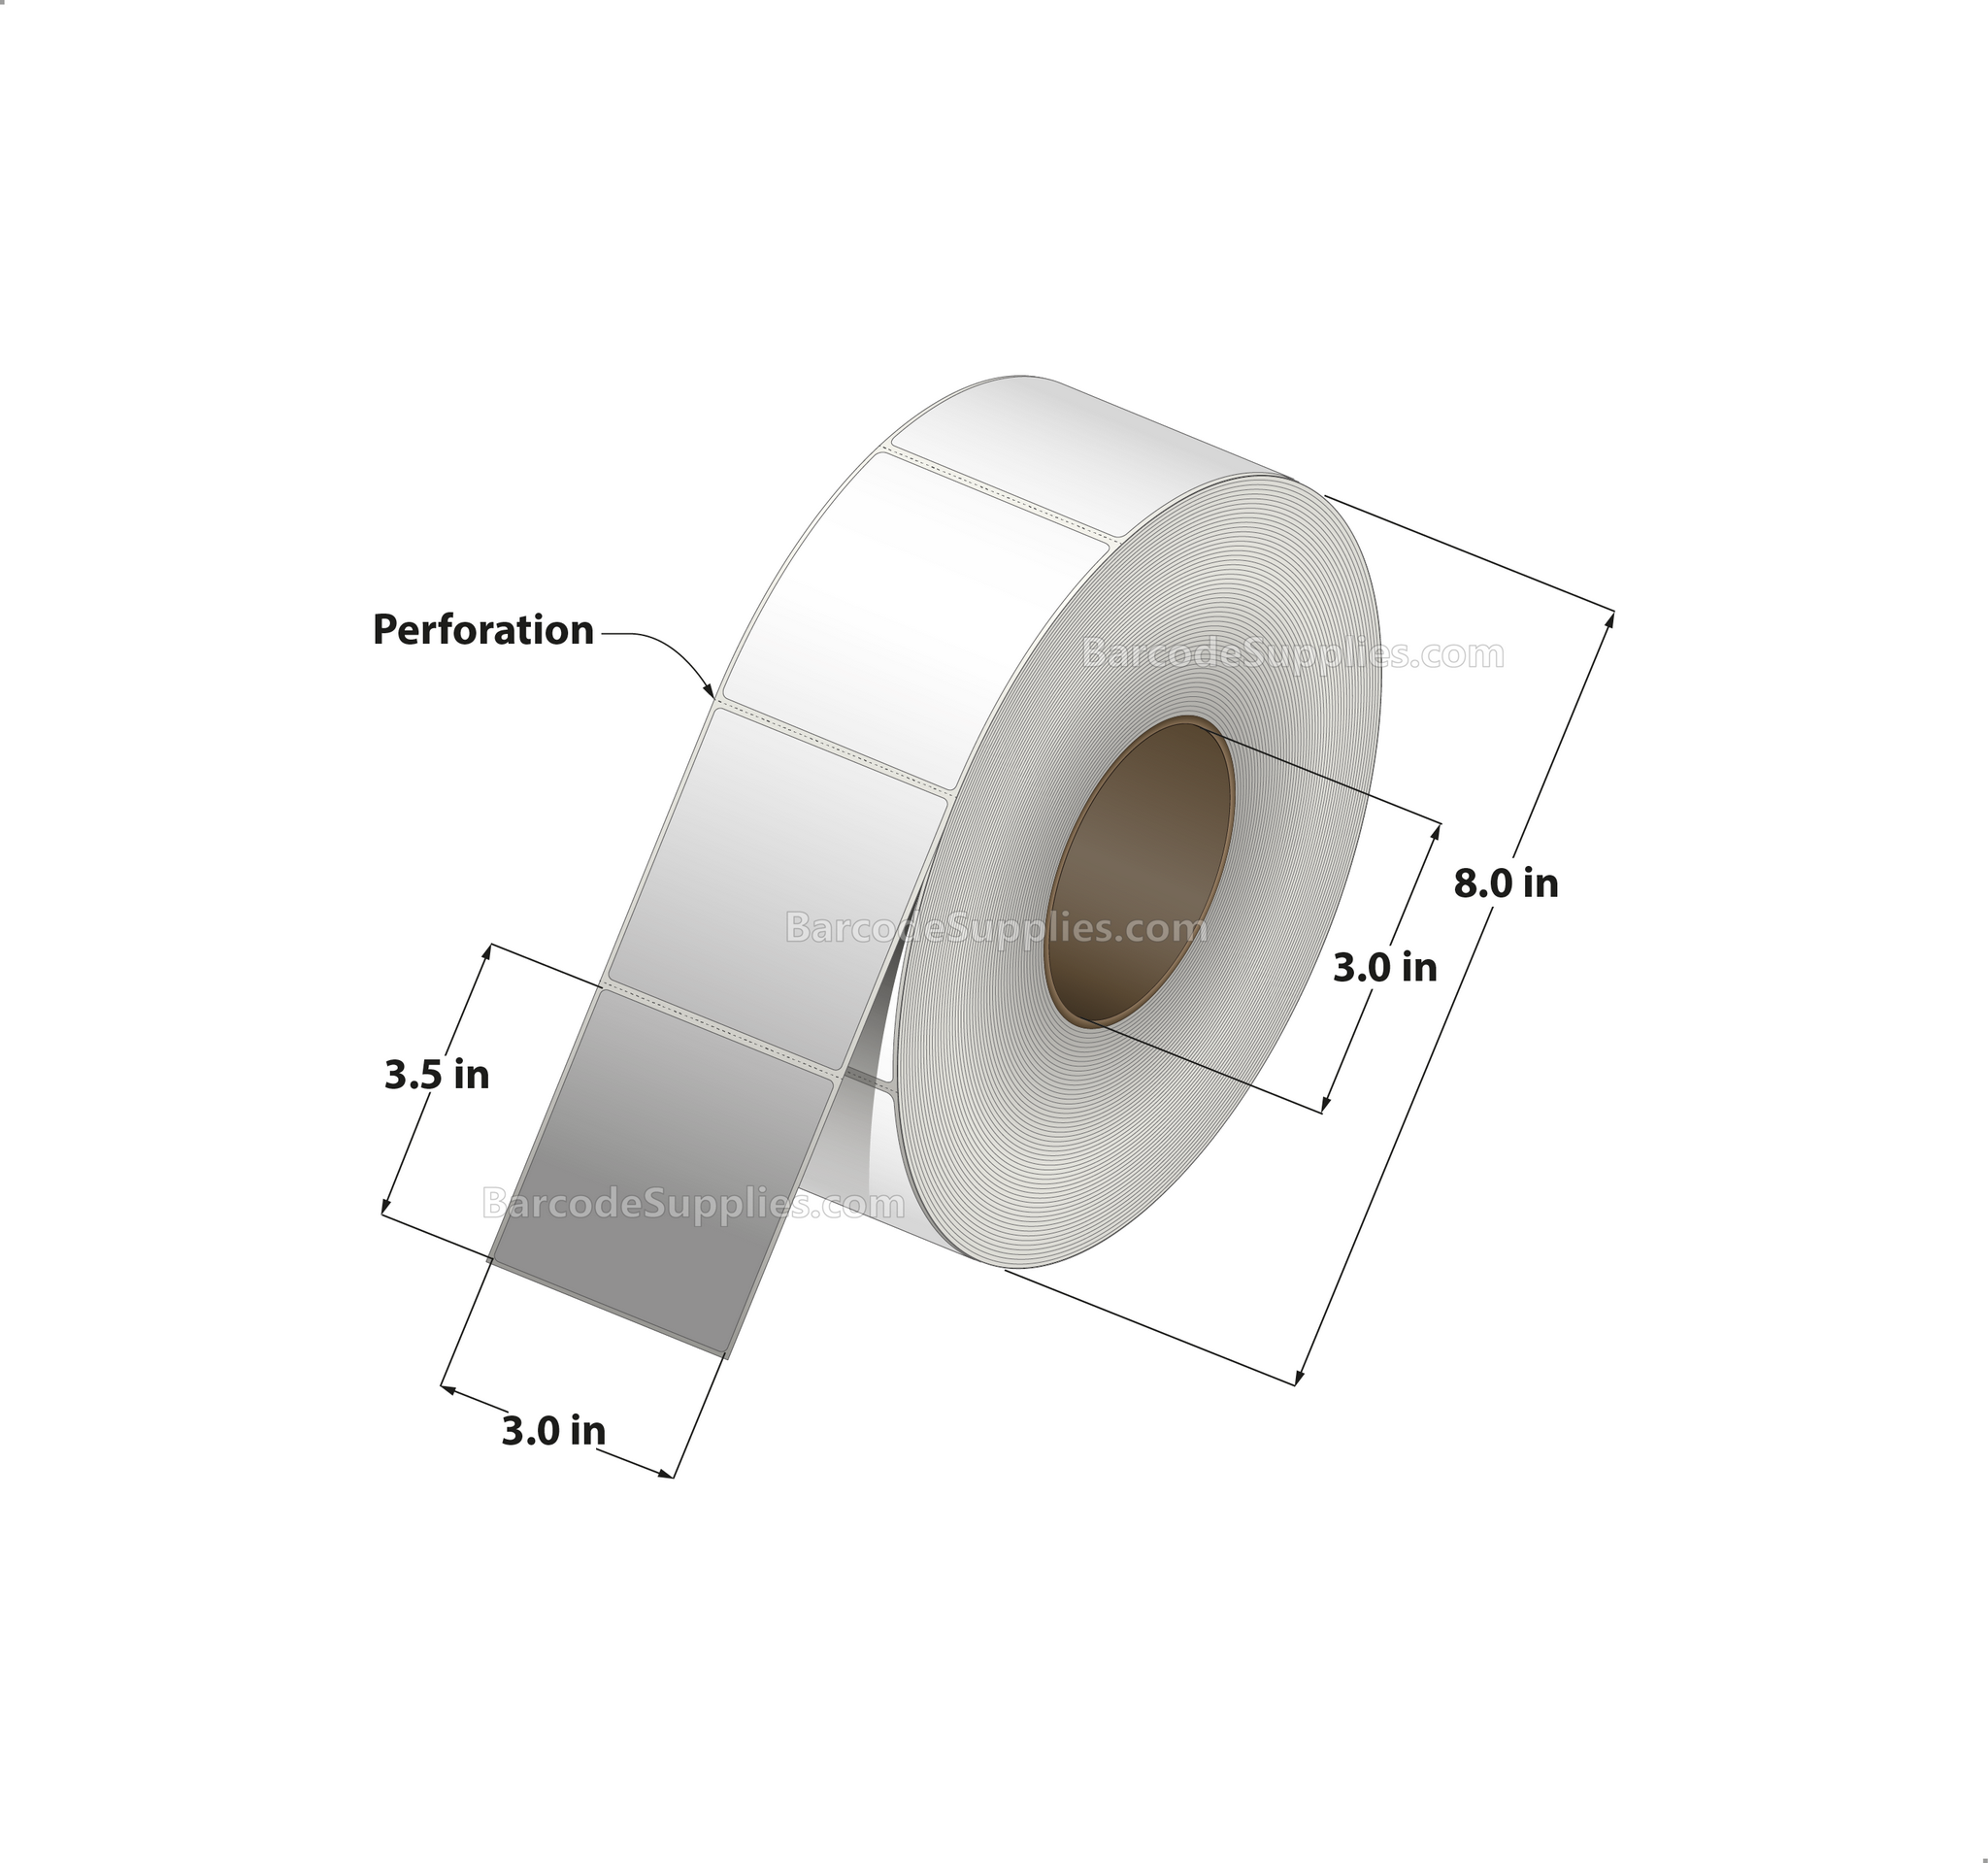 3 x 3.5 Thermal Transfer White Labels With Permanent Adhesive - Perforated - 1700 Labels Per Roll - Carton Of 8 Rolls - 13600 Labels Total - MPN: RT-3-35-1700-3